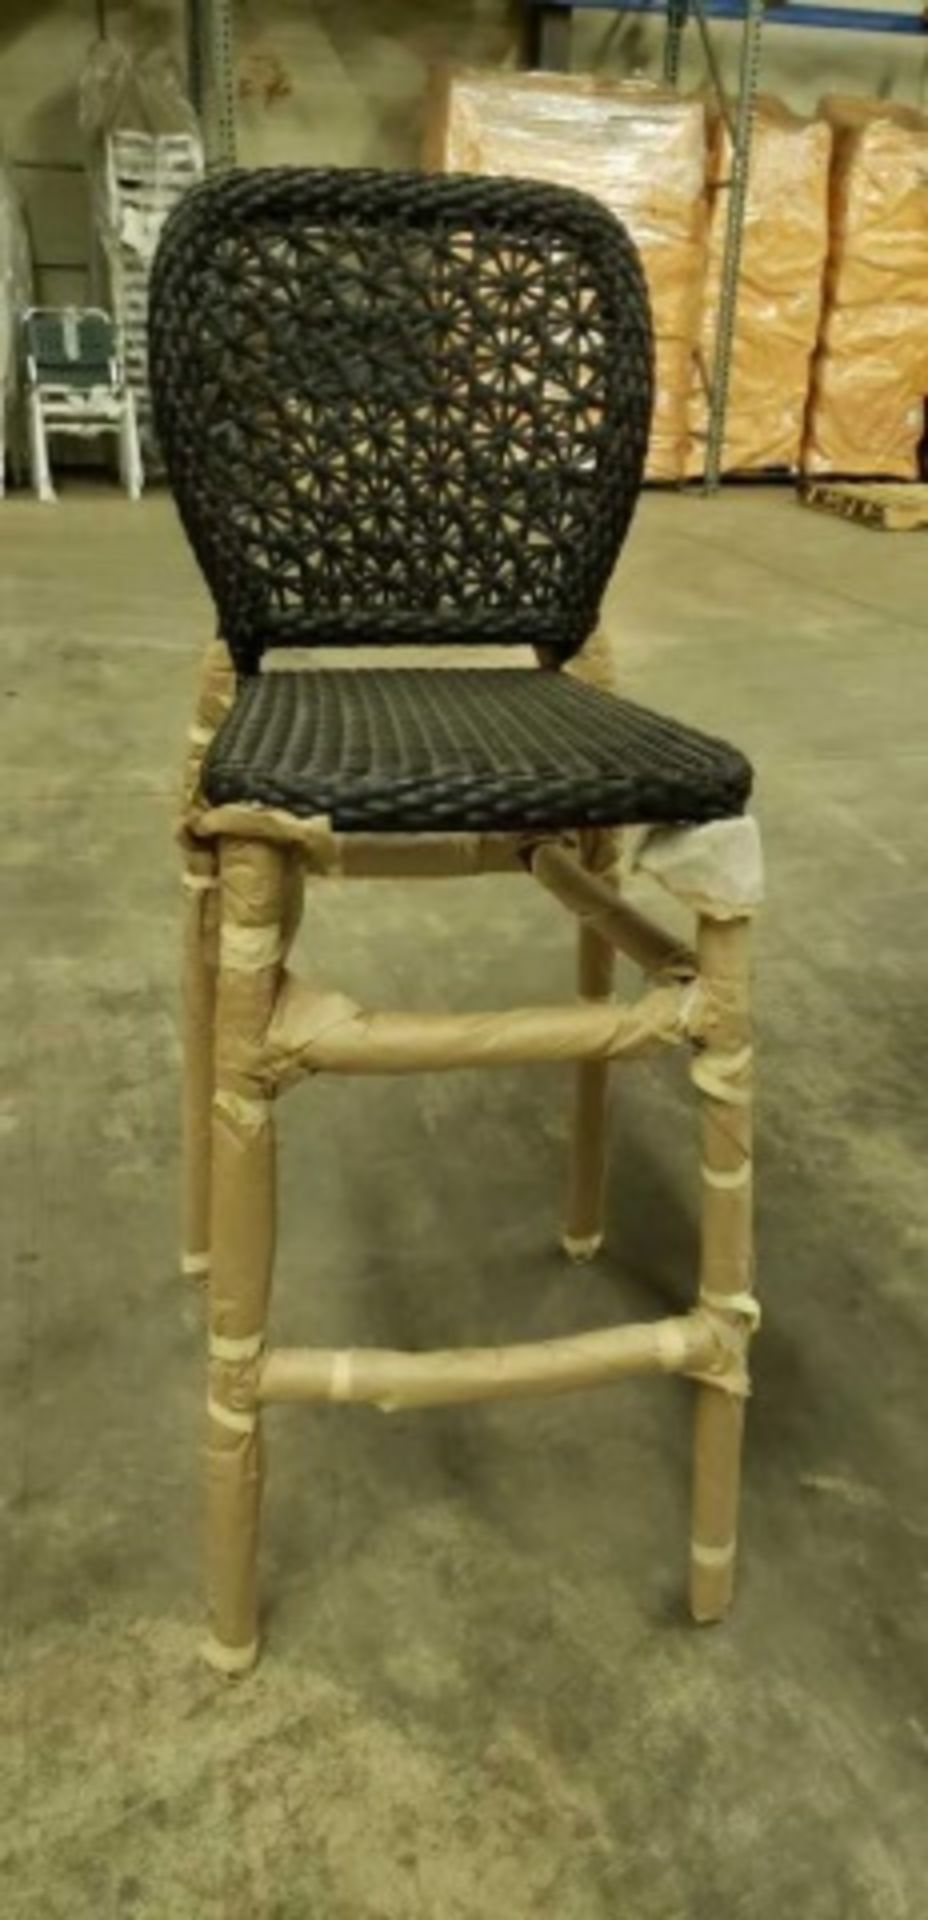 Jessie Barstool - Expresso, C09 JES BS EXP CH. Star Weave Back. 2 stacks with 6 each, plus 3 - Image 2 of 6